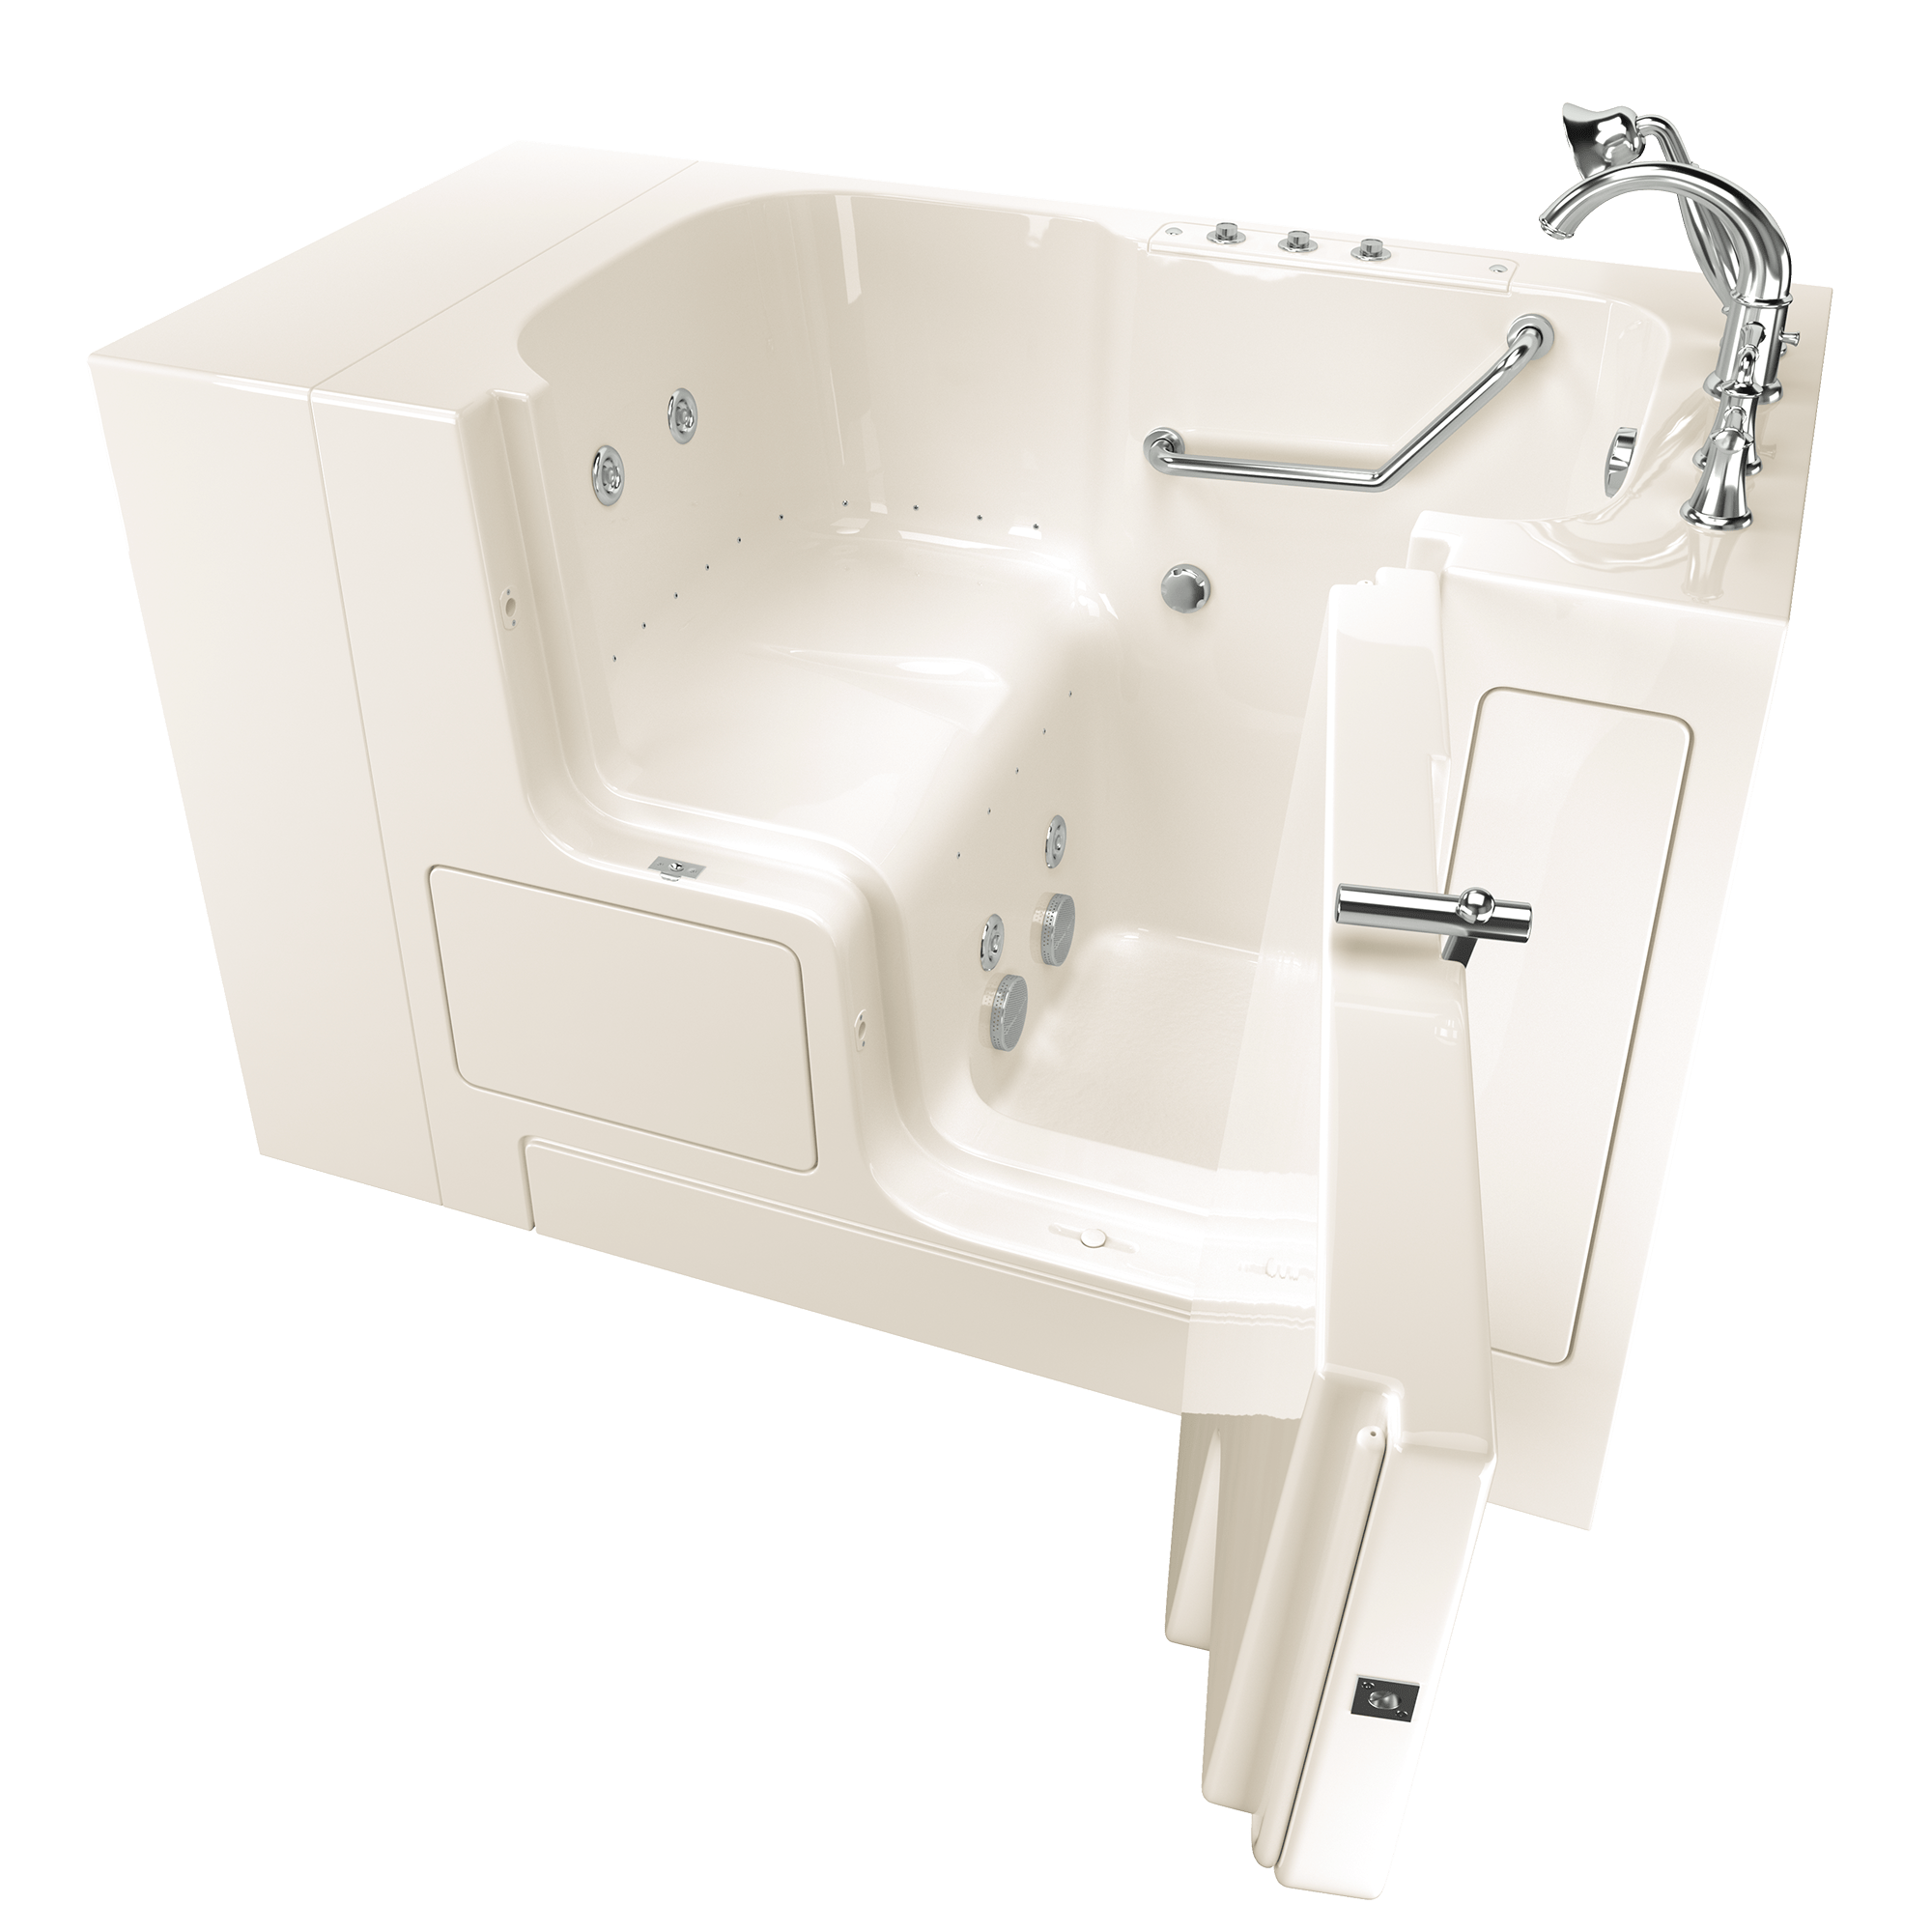 Gelcoat Value Series 32 x 52 -Inch Walk-in Tub With Combination Air Spa and Whirlpool Systems - Right-Hand Drain With Faucet